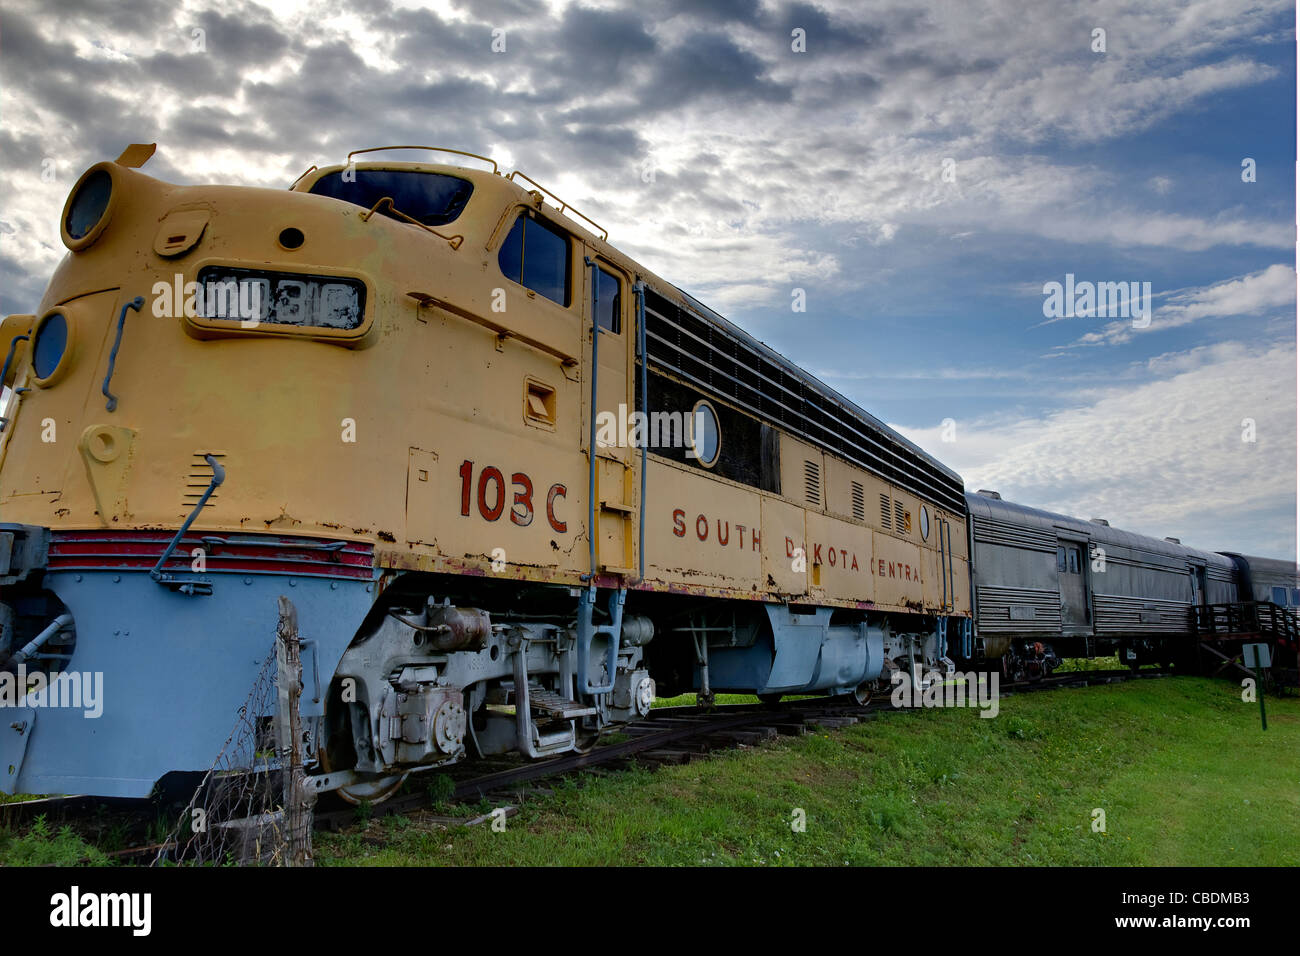 A Vintage Locomotive from the Wild West known as the South Dakota Central. Stock Photo